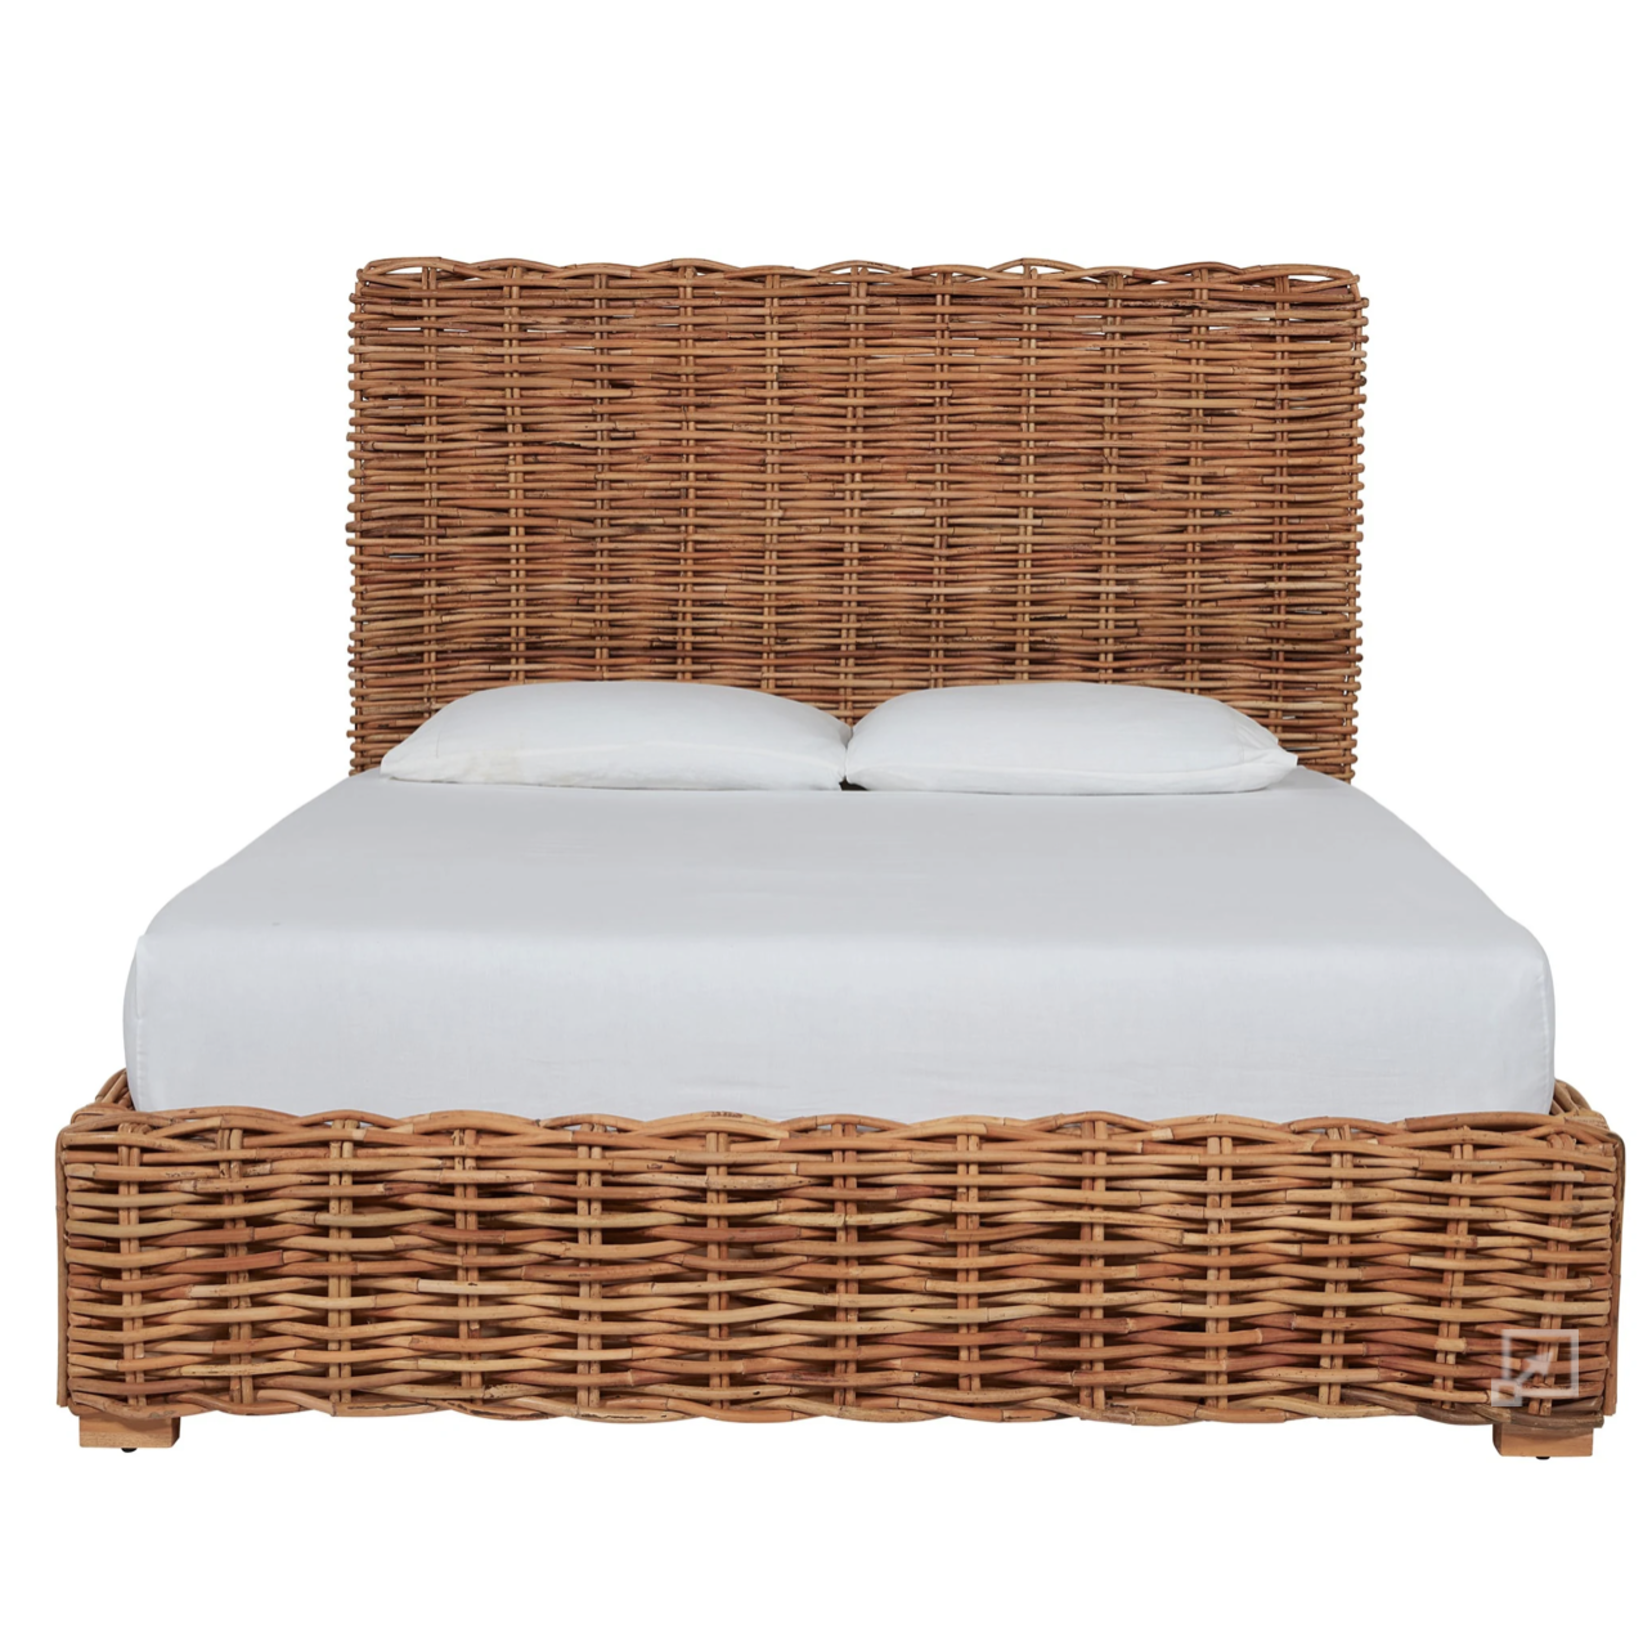 Outside The Box 69x94x58 Coastal Key Woven Rattan Queen Bed